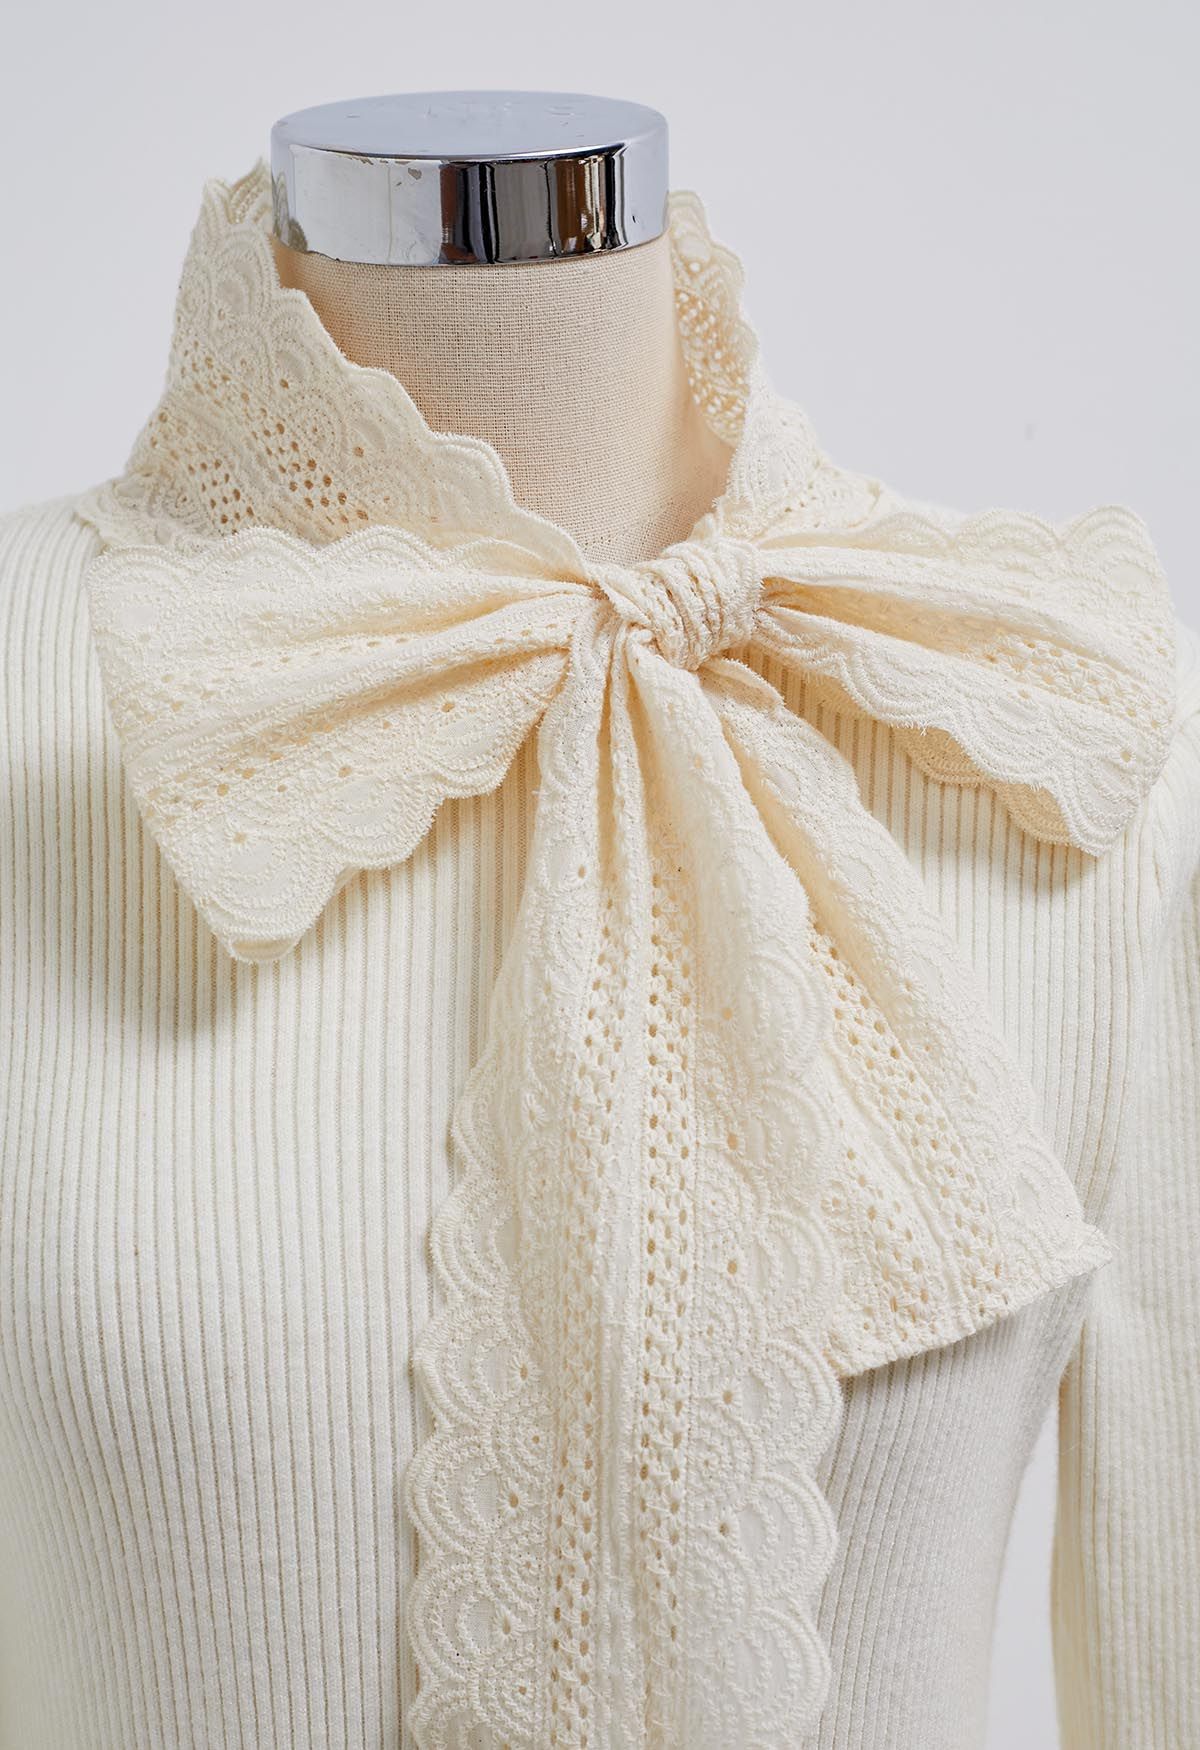 Embroidered Eyelet Bowknot Ribbed Knit Top in Cream